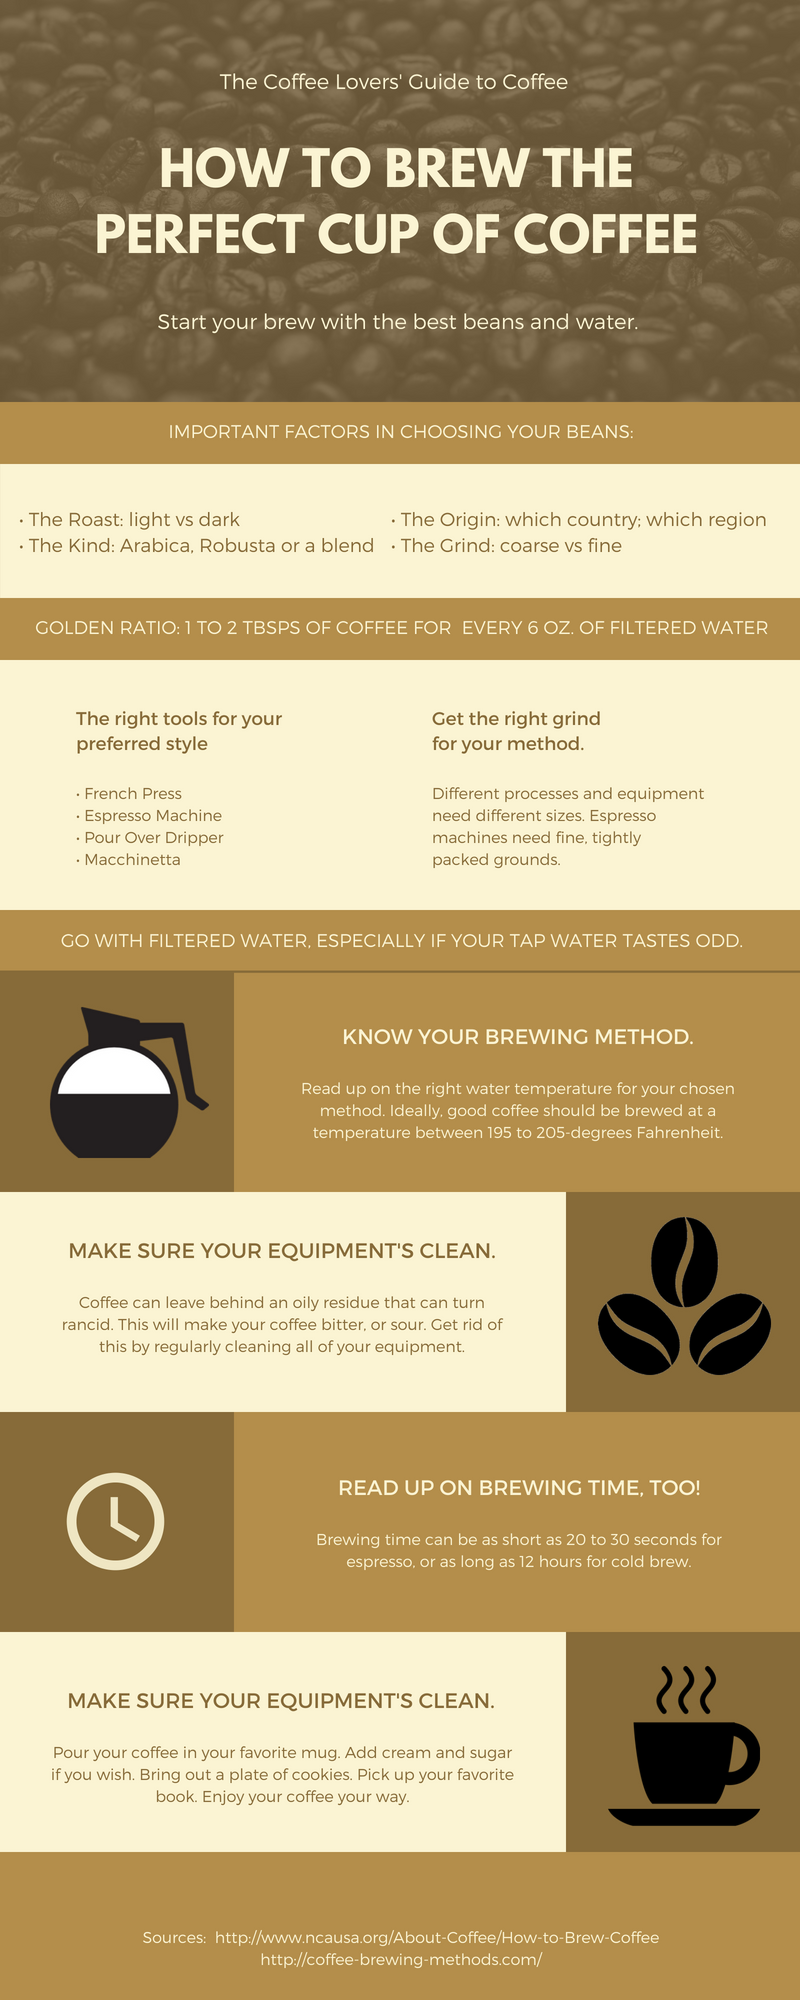 How to Brew the Perfect Cup of Coffee - An Infographic